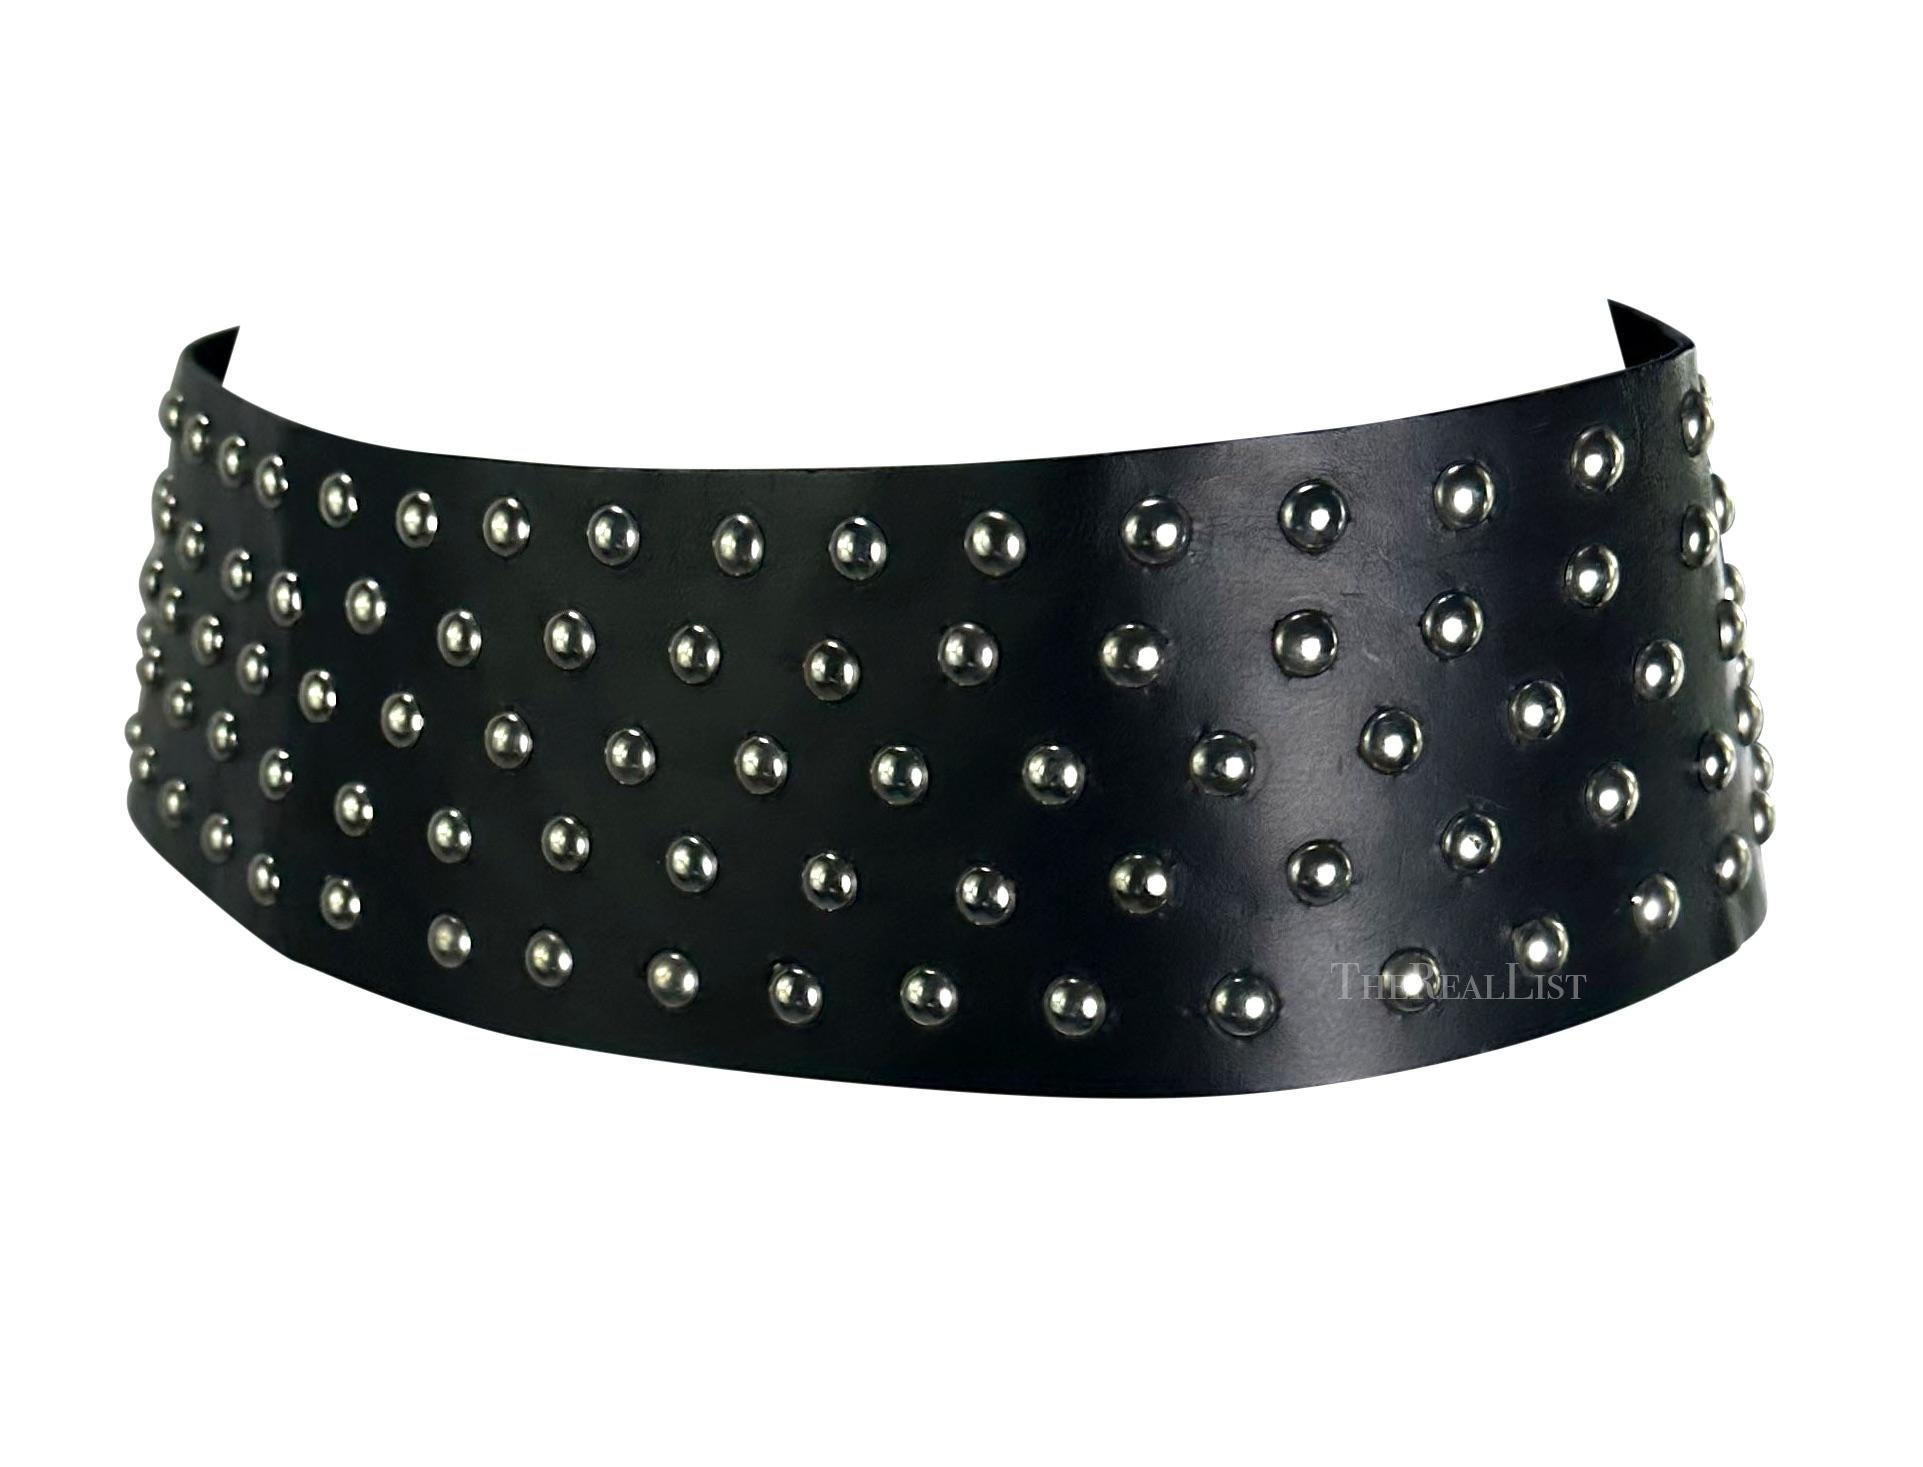 Presenting a wide black Dolce and Gabbana belt. From the early 2000s, this belt is covered in gunmetal studs and features a velcro closure.

Approximate measurements:
Size - IT42
3.5